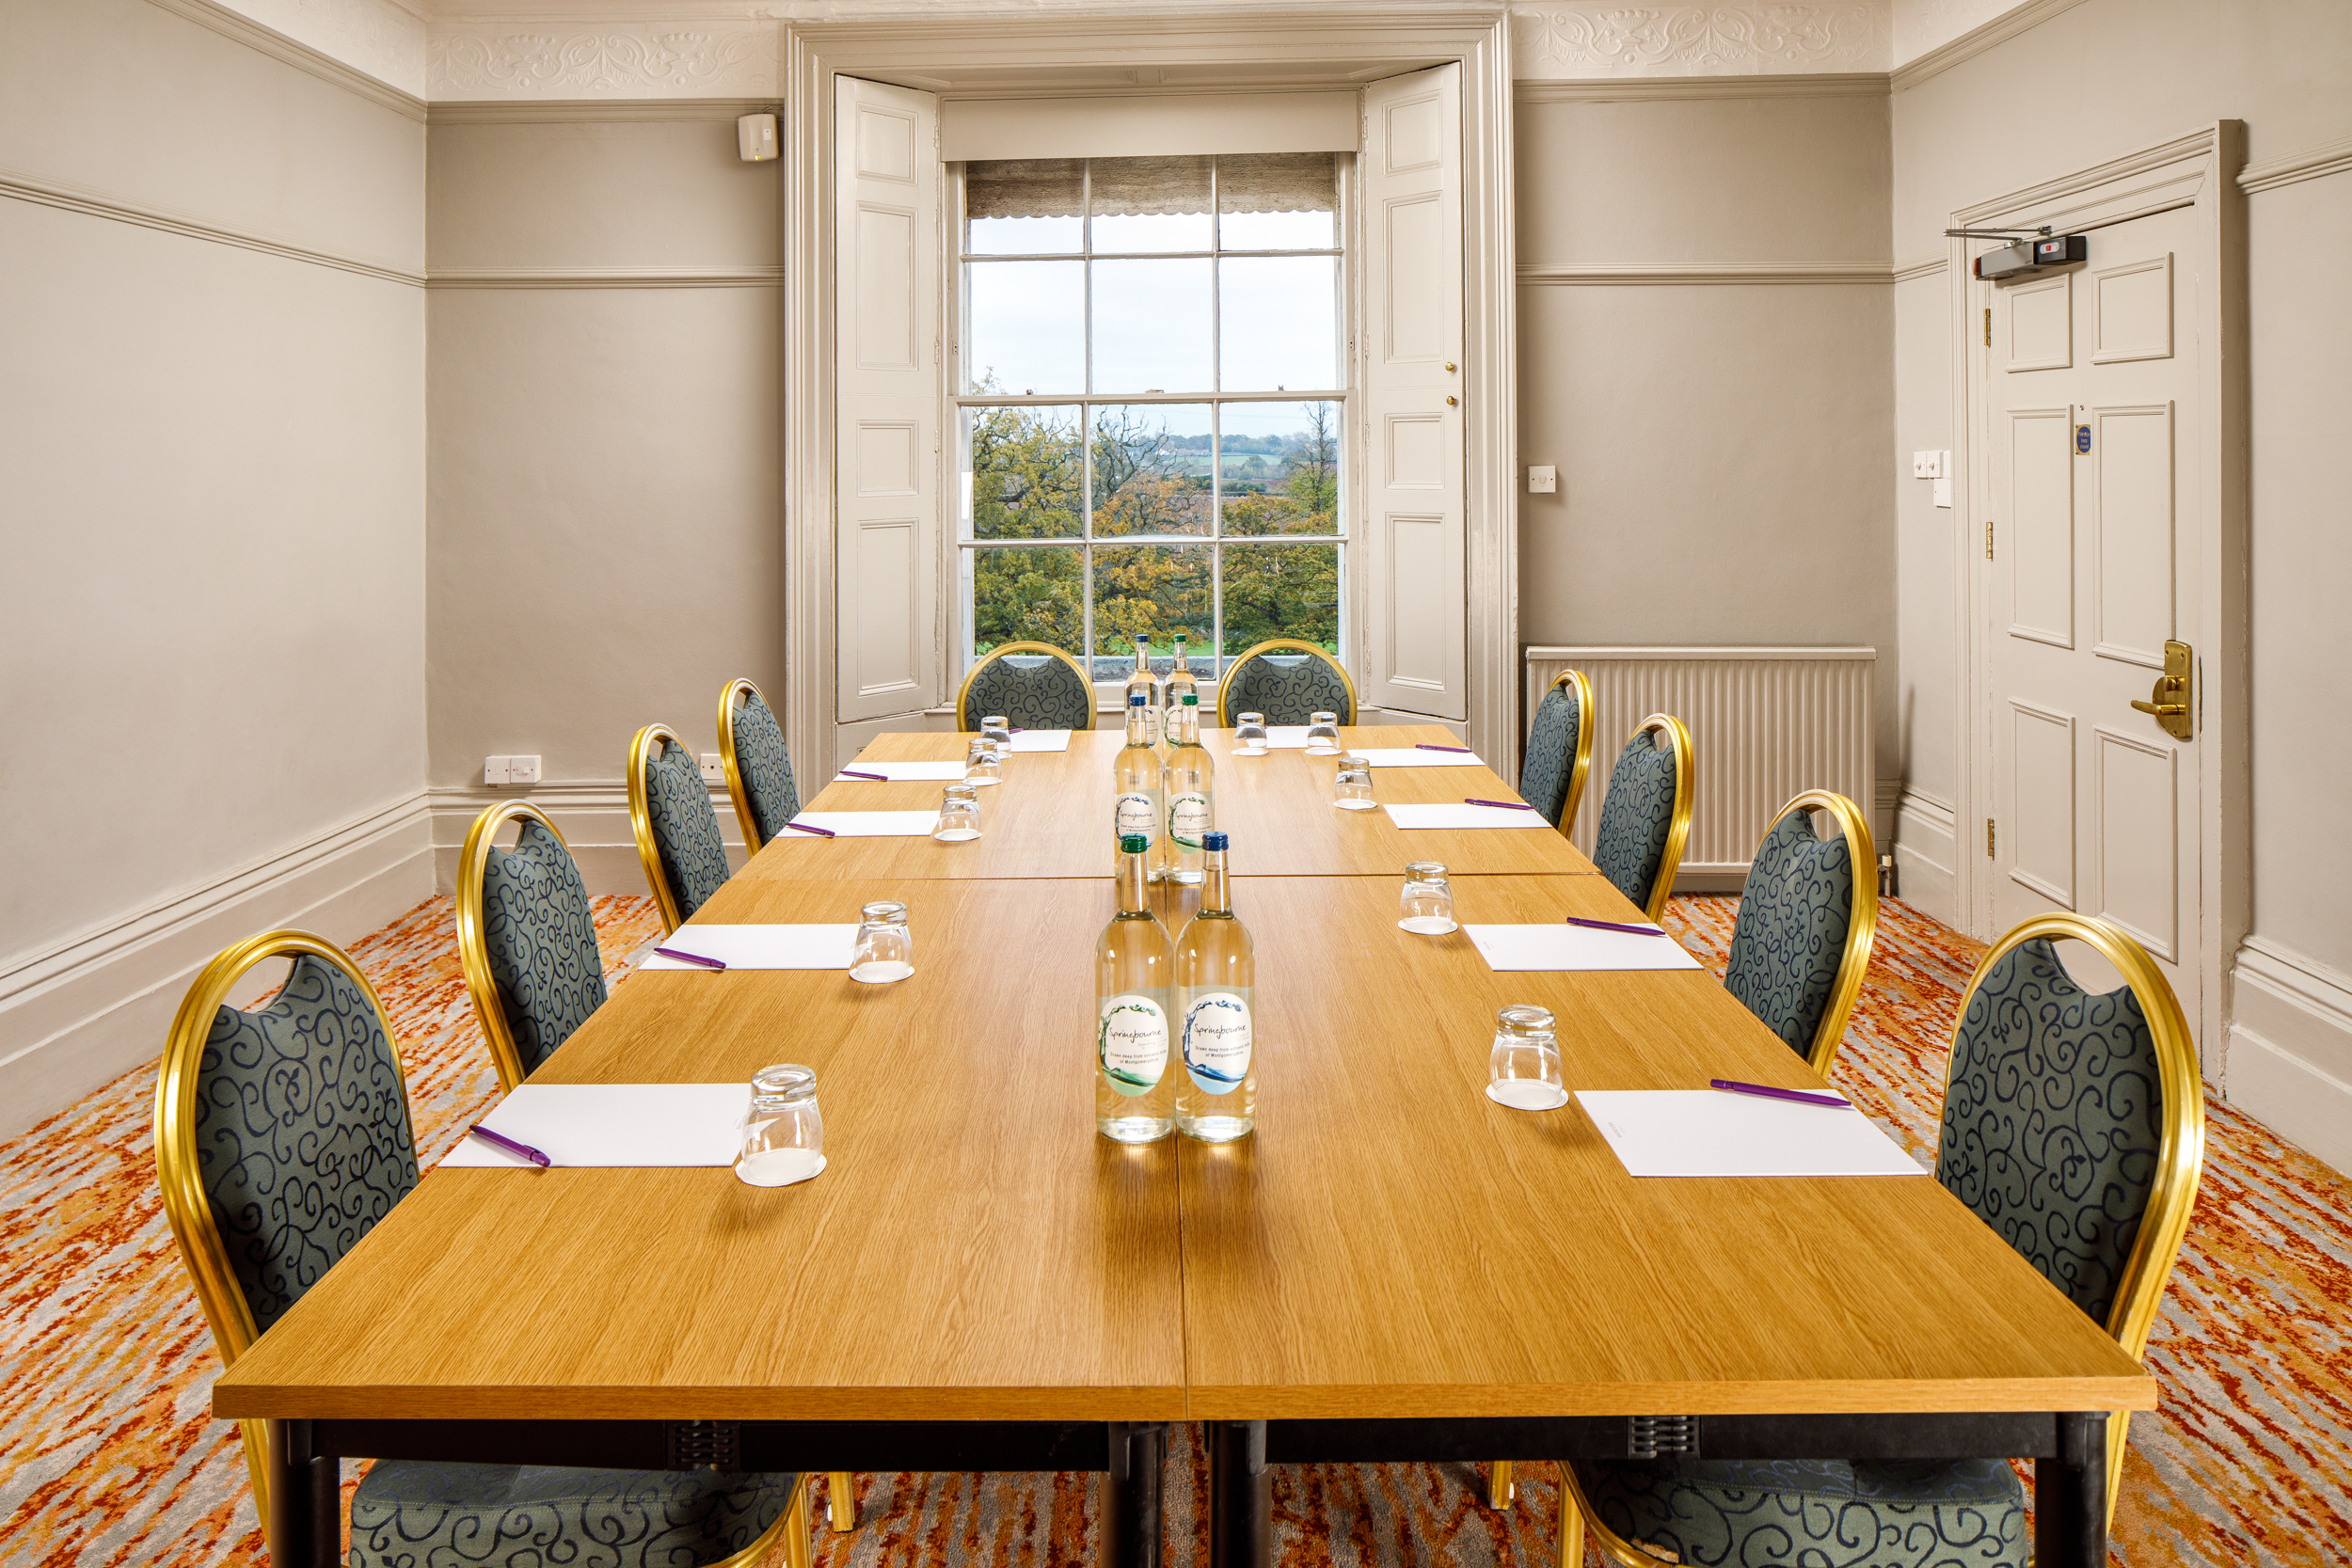 The long table seating 10 in The Boardroom at mercure gloucester bowden hall hotel ready for a meeting, with notepads and bottles of water on the table